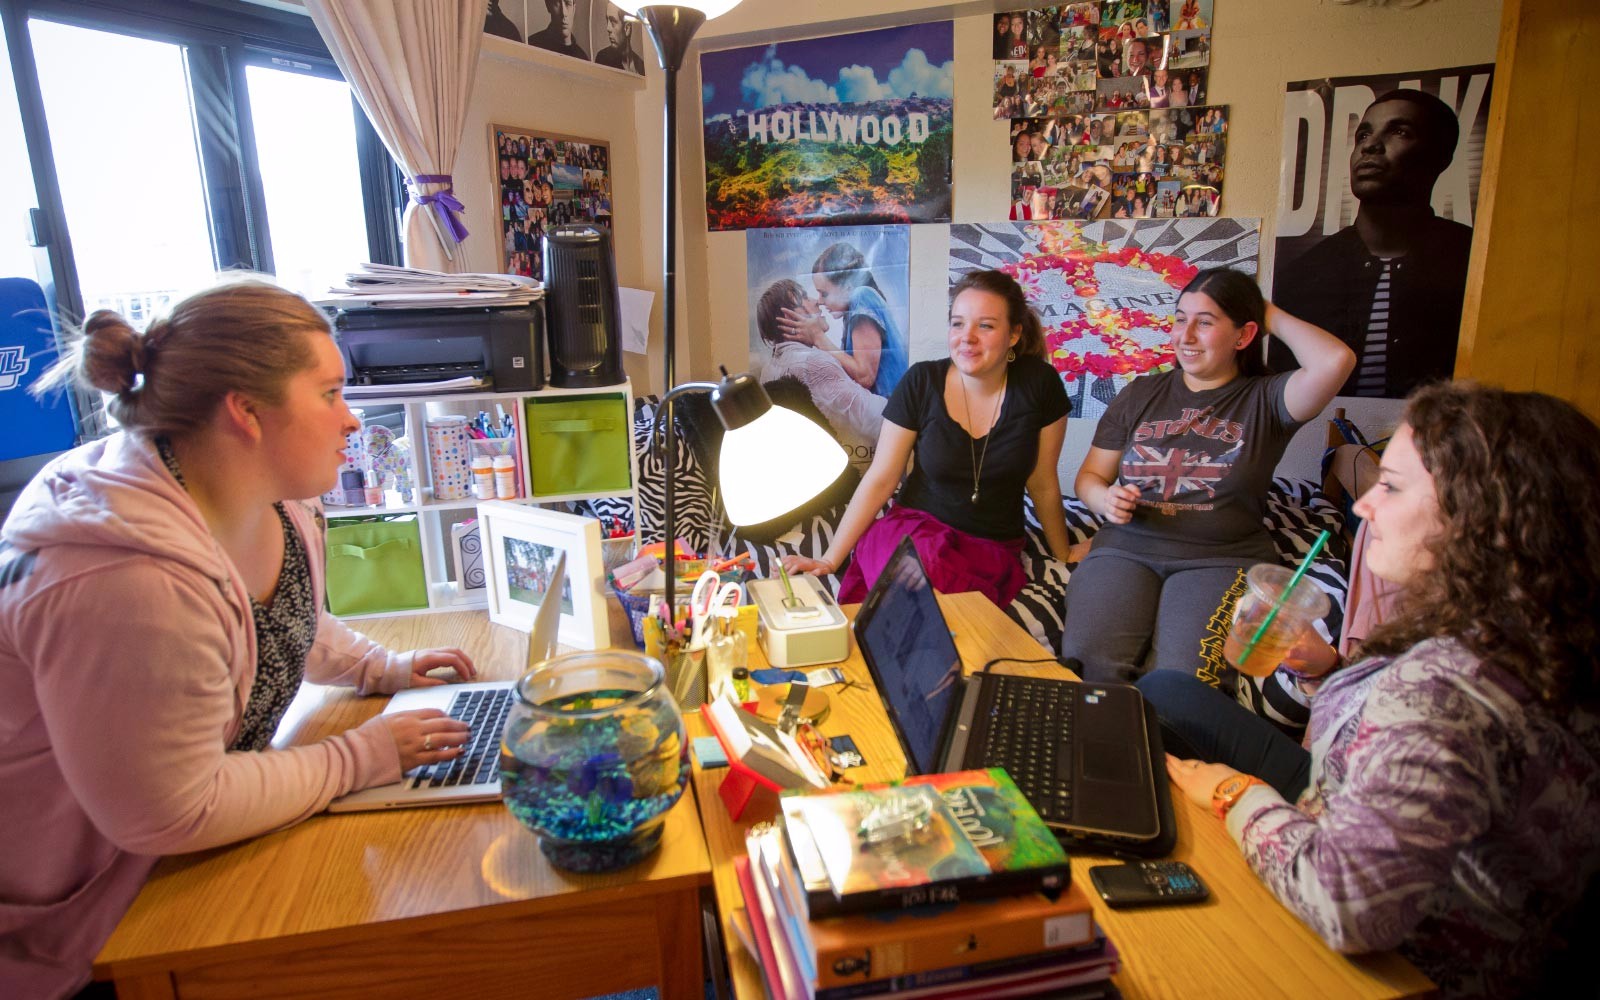 A group of students talking in a dorm room.